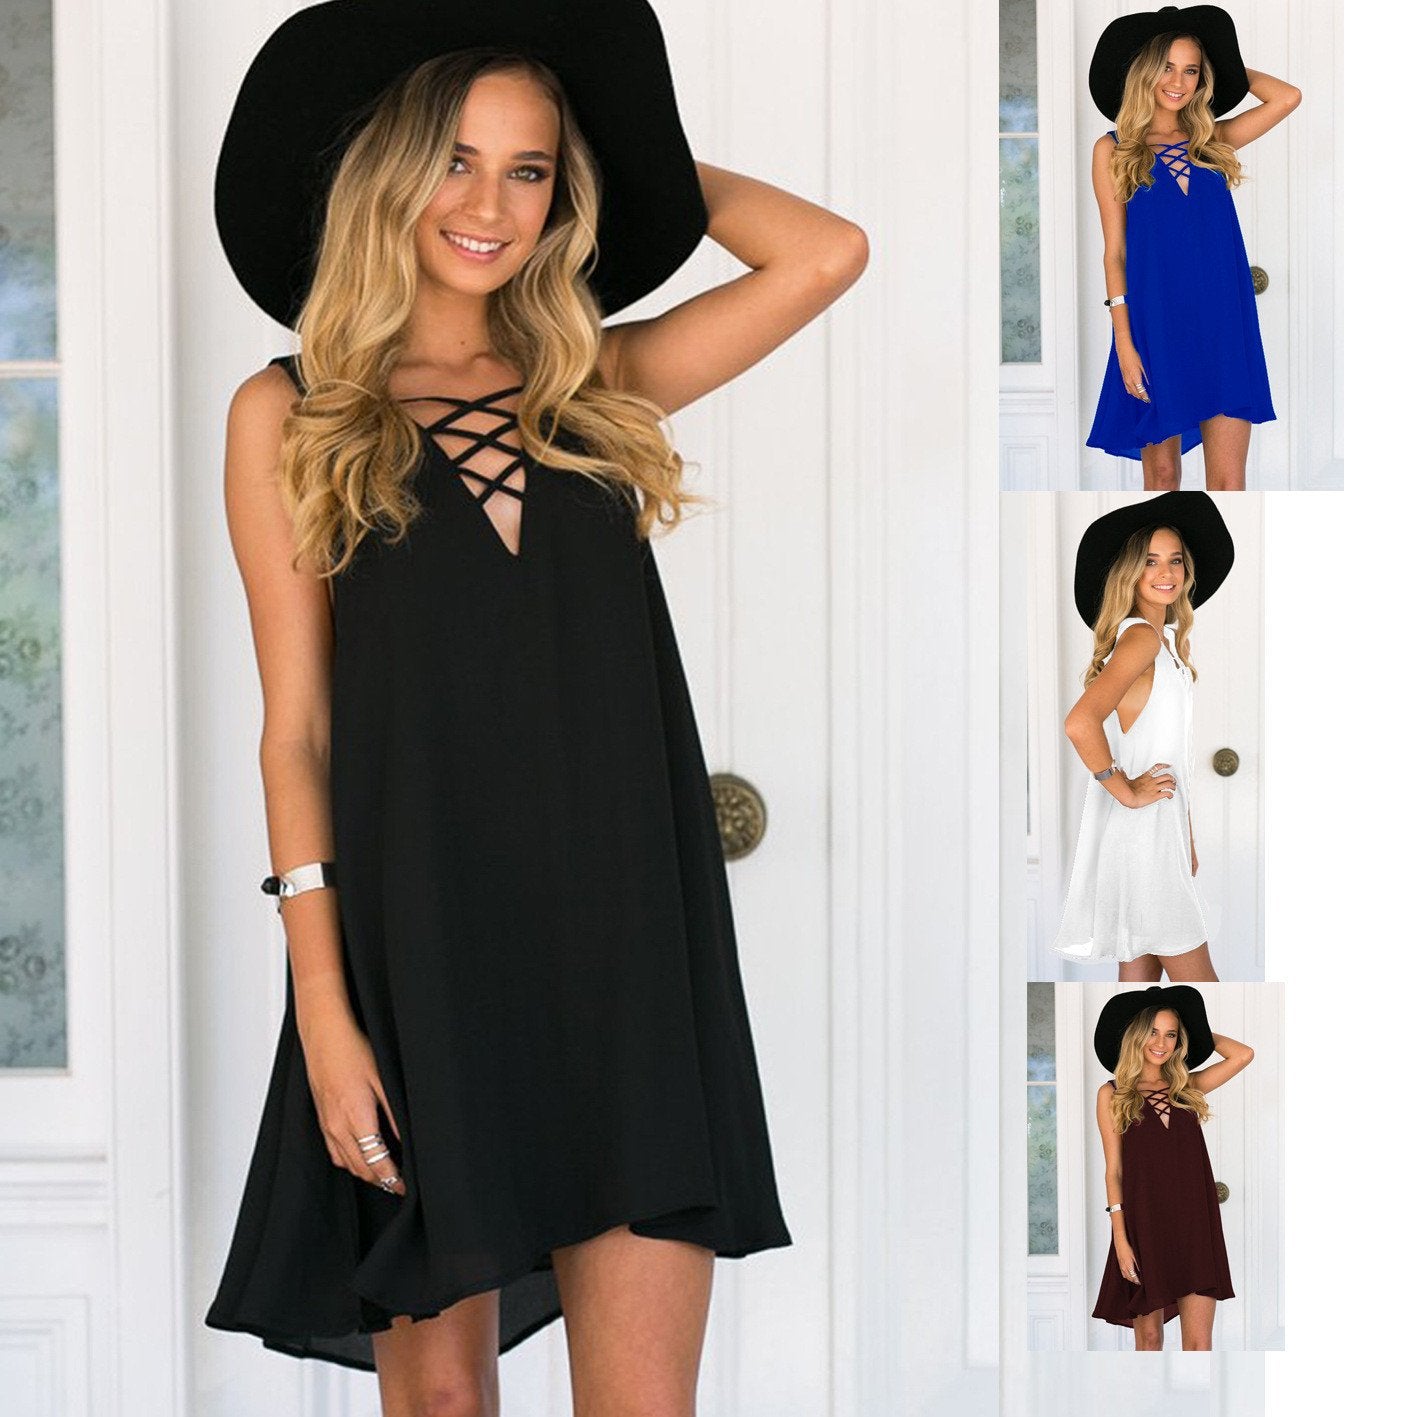 V-neck Sleeveless Pure Color Chest Cross Short Dress - Meet Yours Fashion - 1